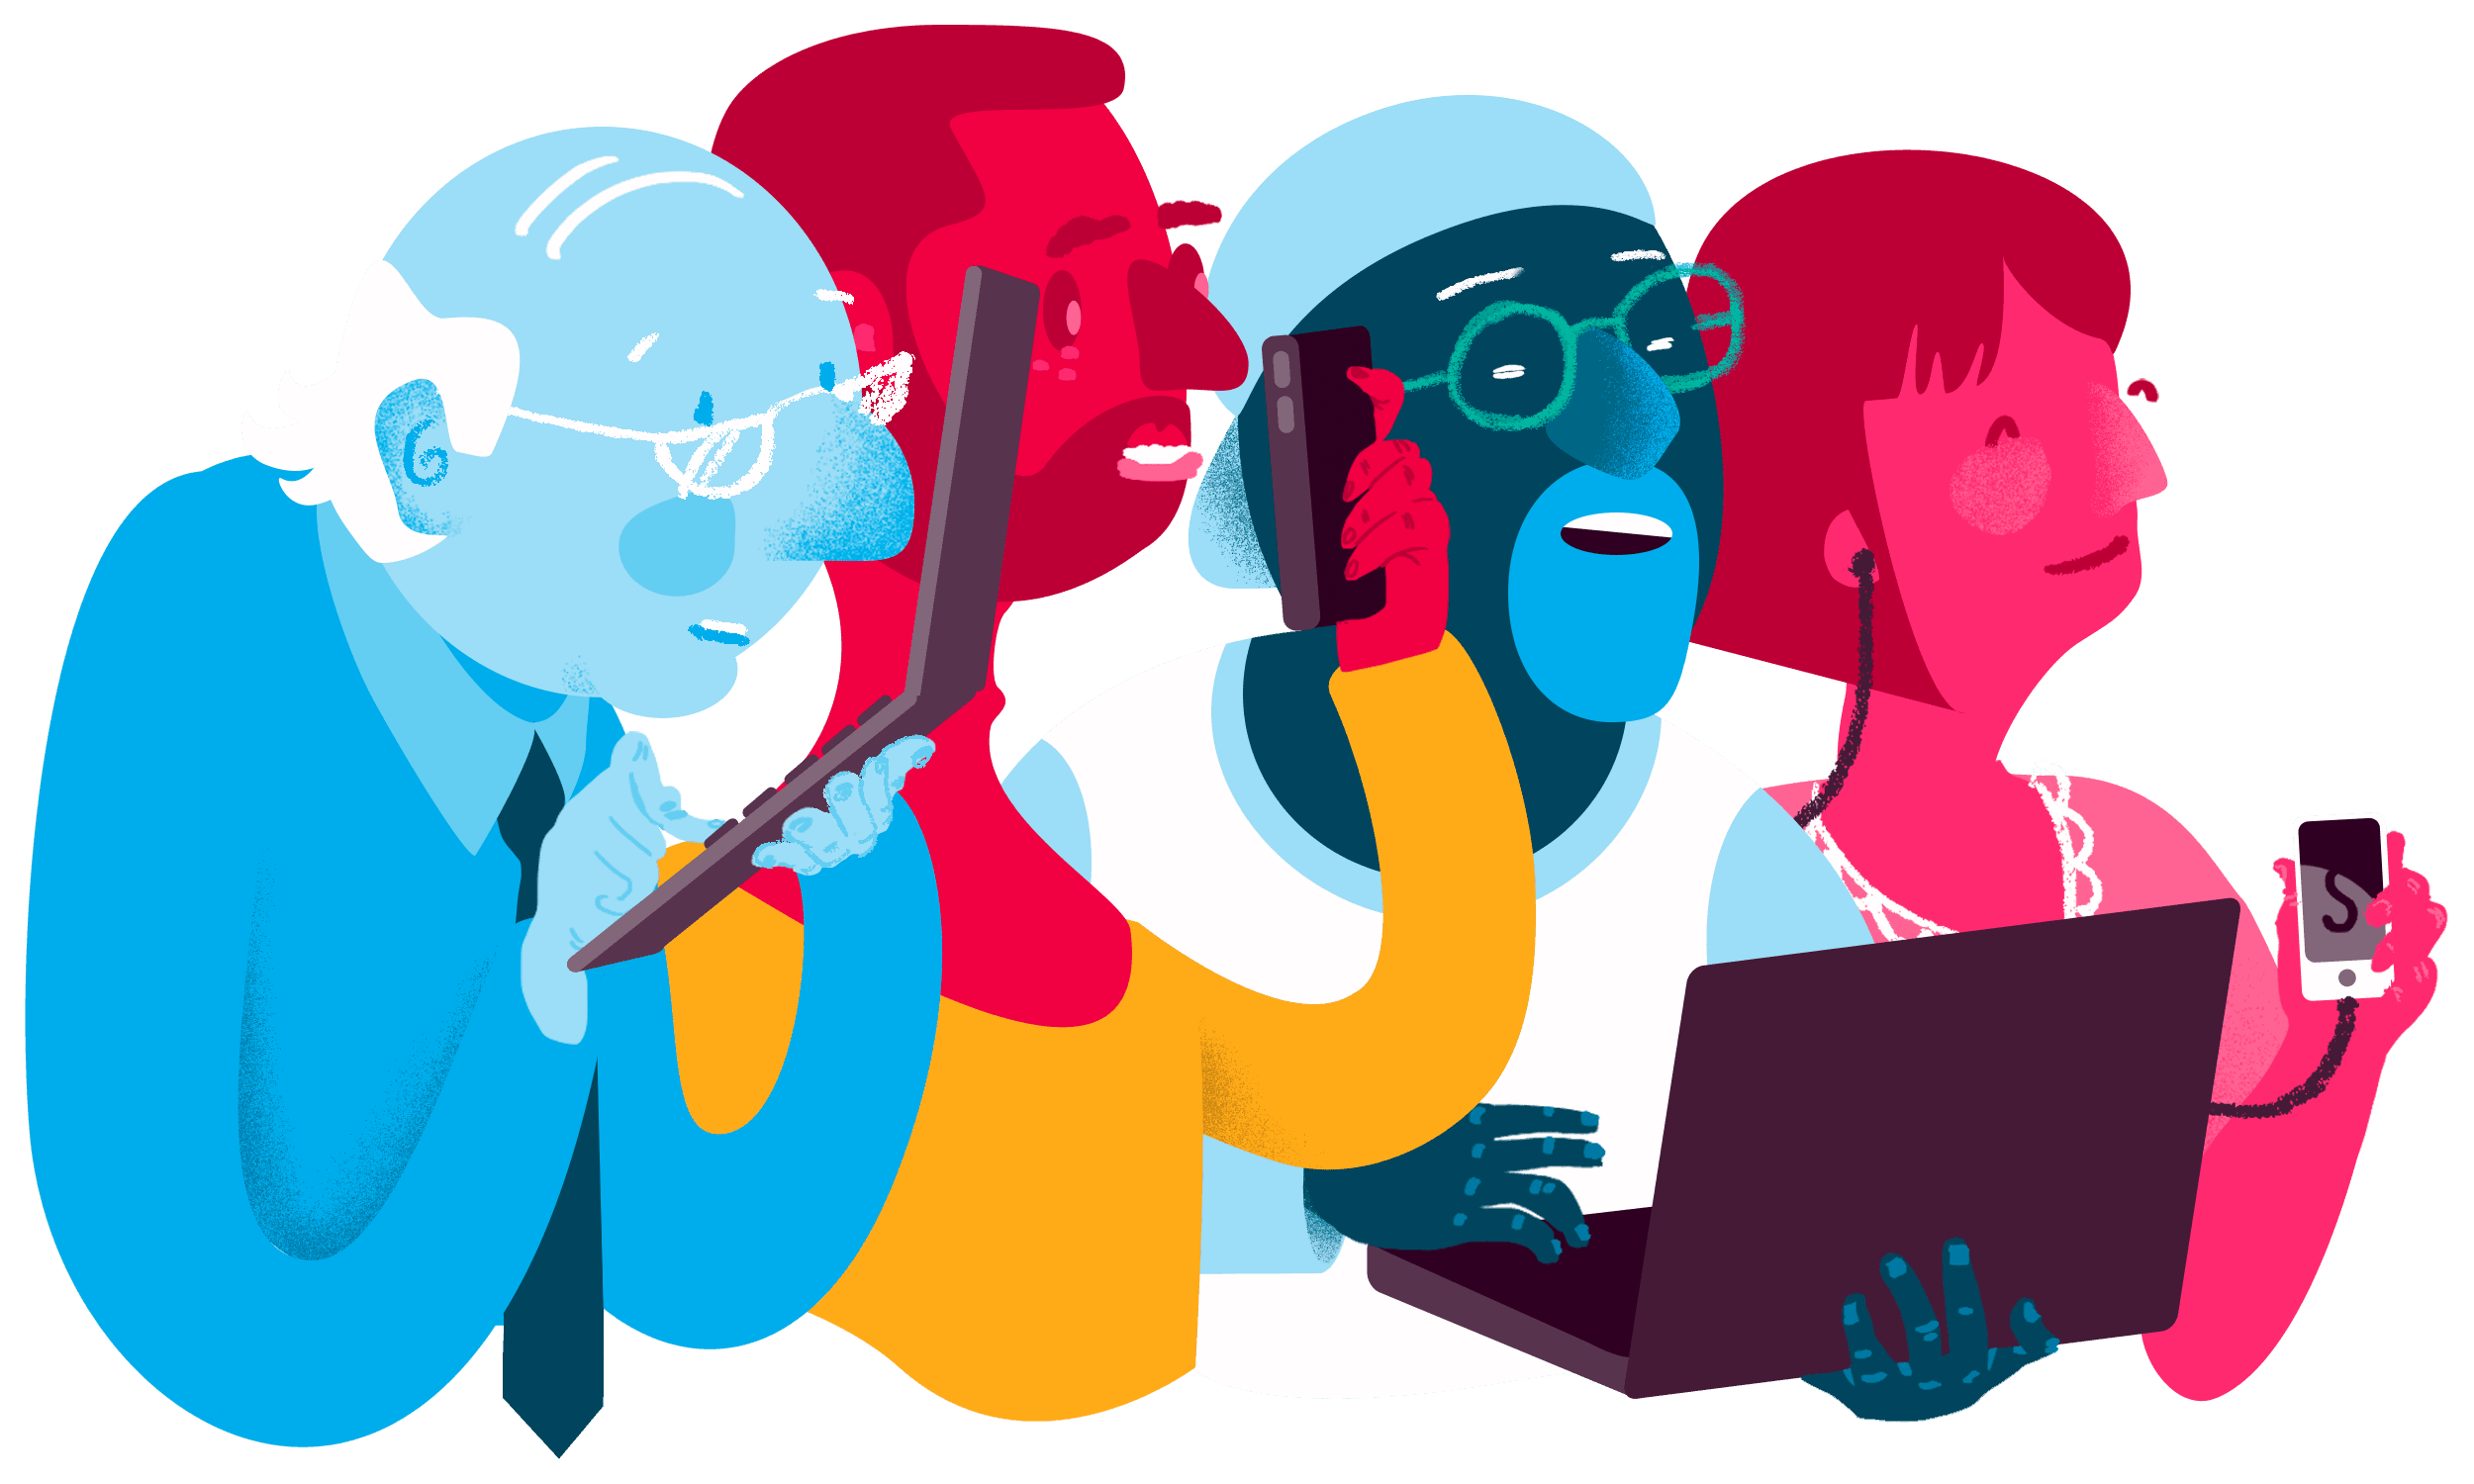 Illustration depicting a colorful group of people using an array of mobile devices.